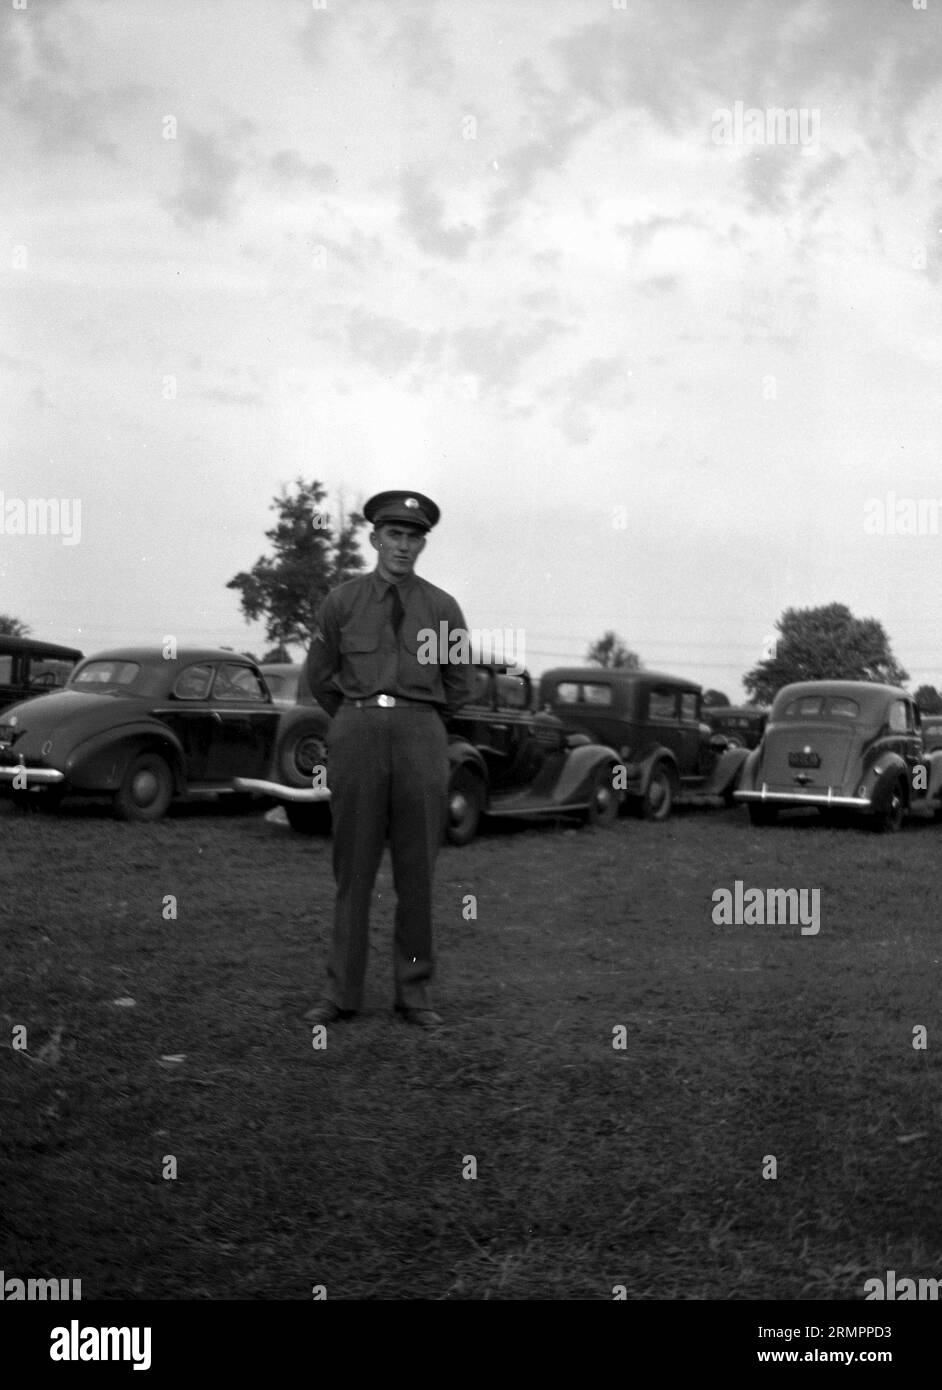 Soldier in uniform standing near cars. Members of the United States Army’s 114th infantry division train to fight against Germany in Europe during WWII. Stock Photo